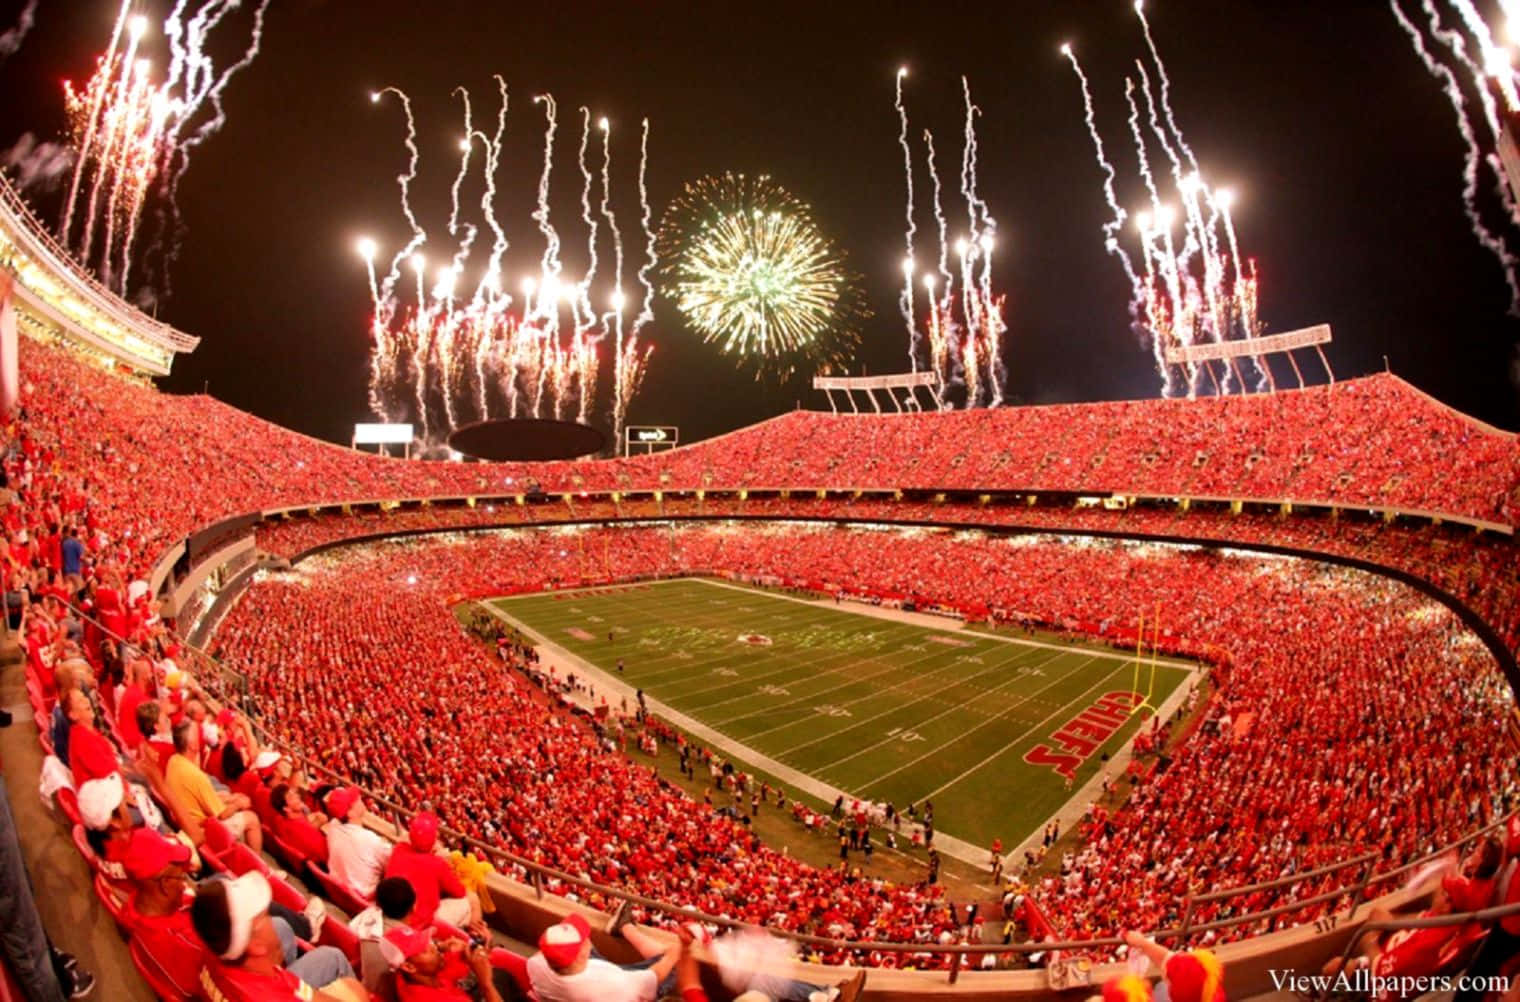 Get in the game with a Kansas City Chiefs 4K wallpaper! Wallpaper